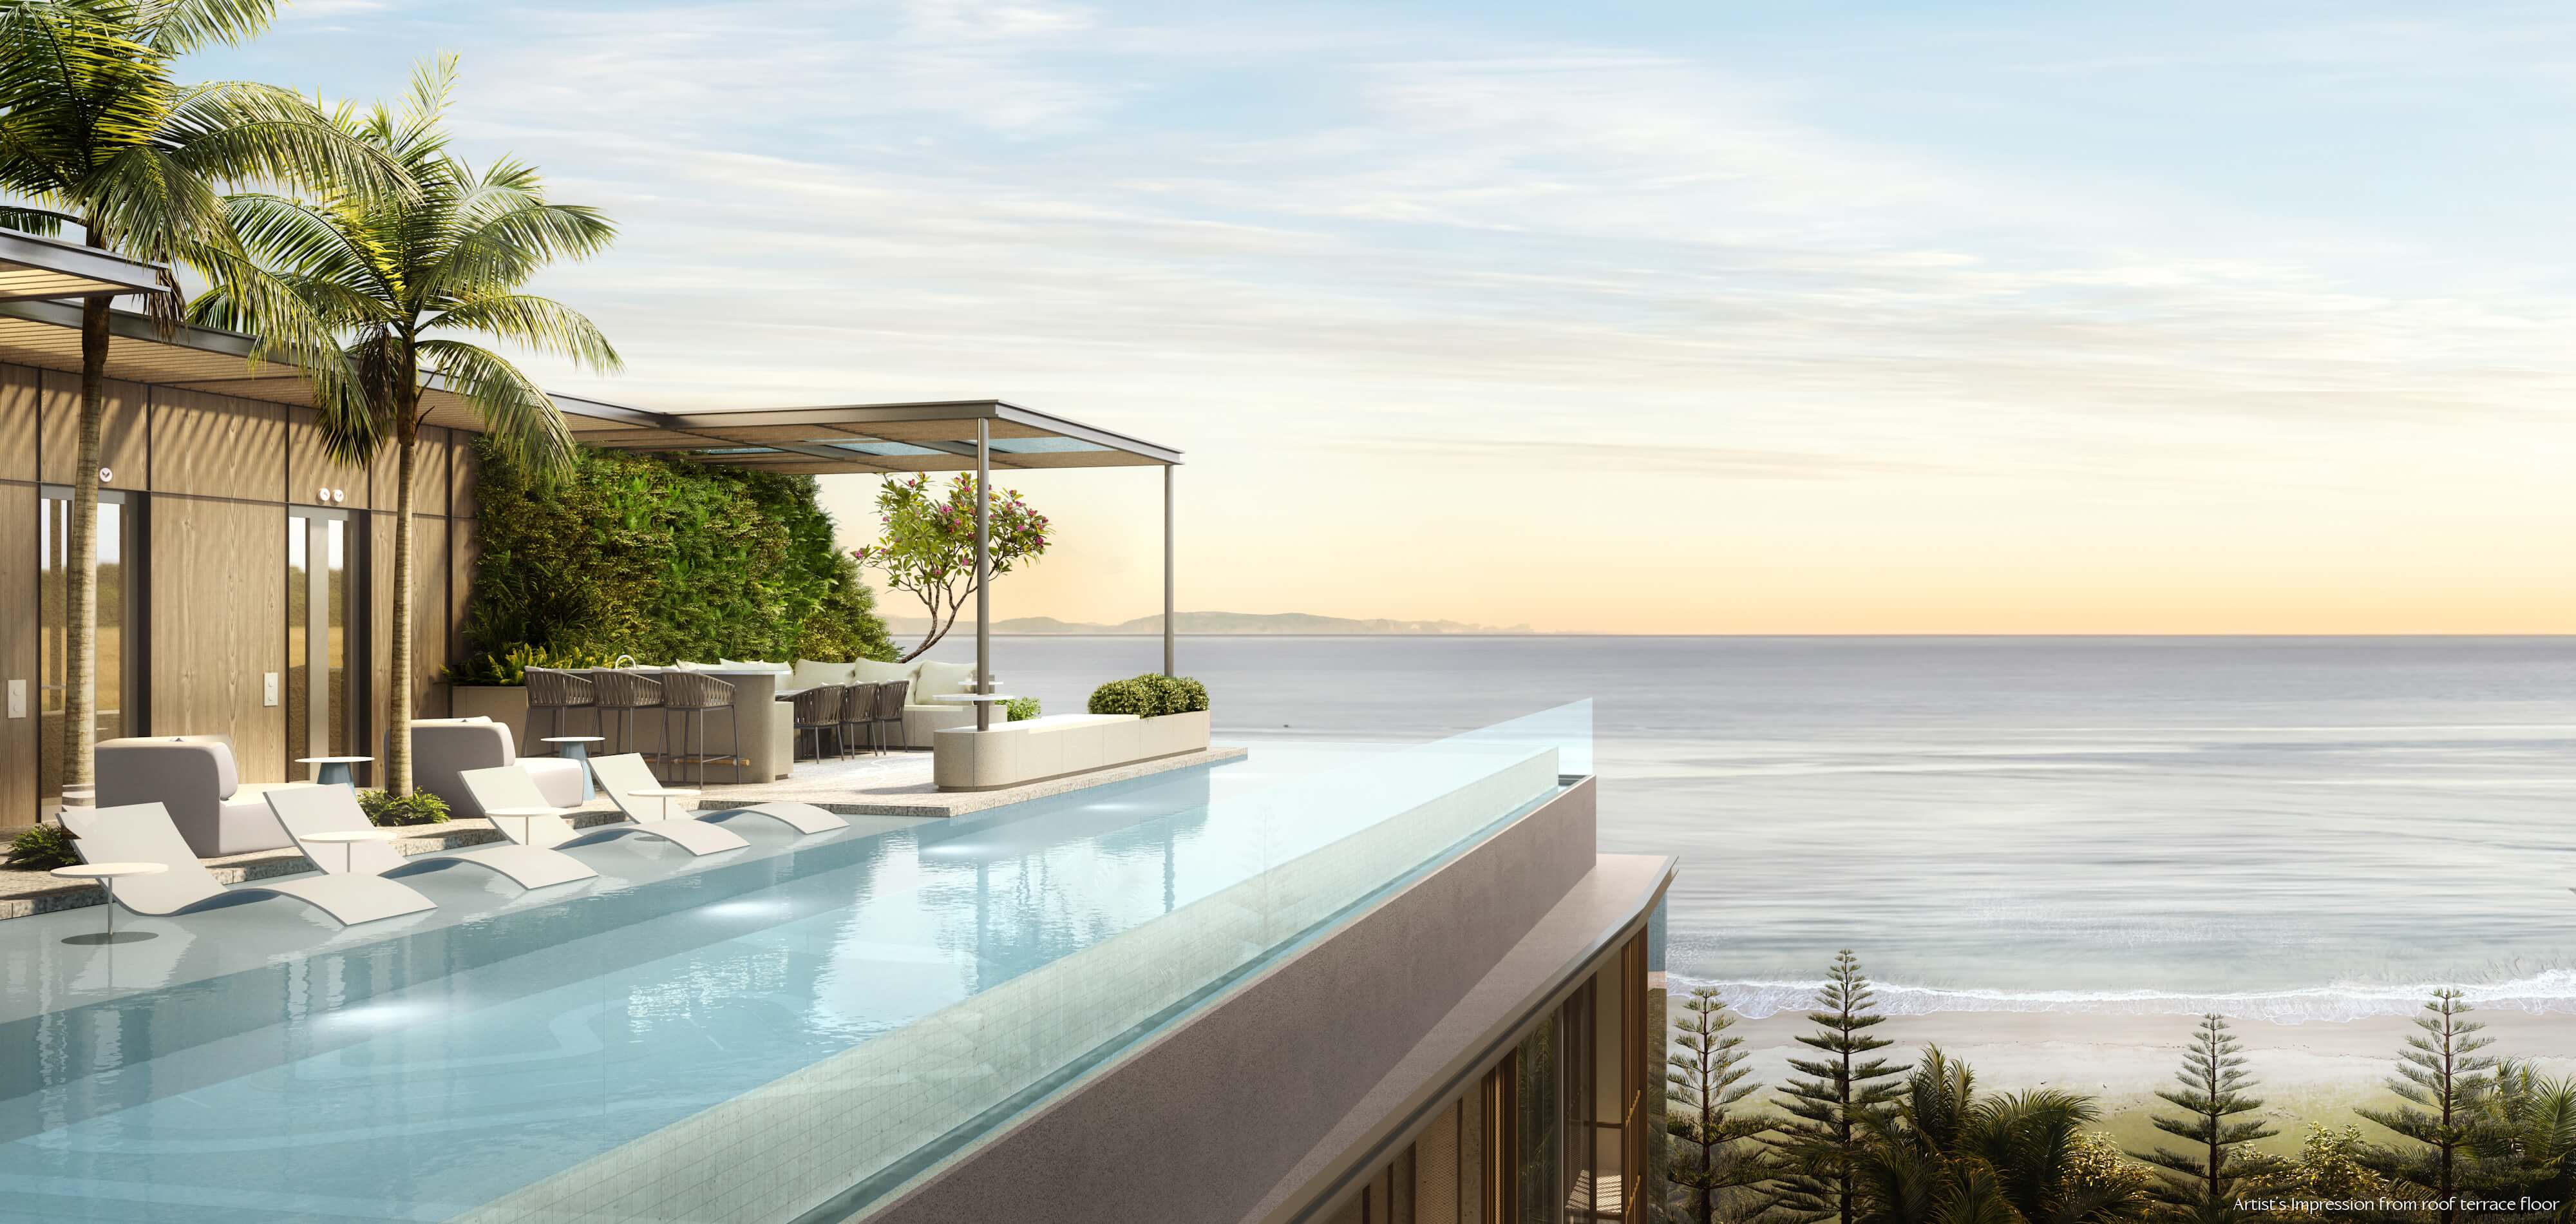 The Shorefront Infinity Pool